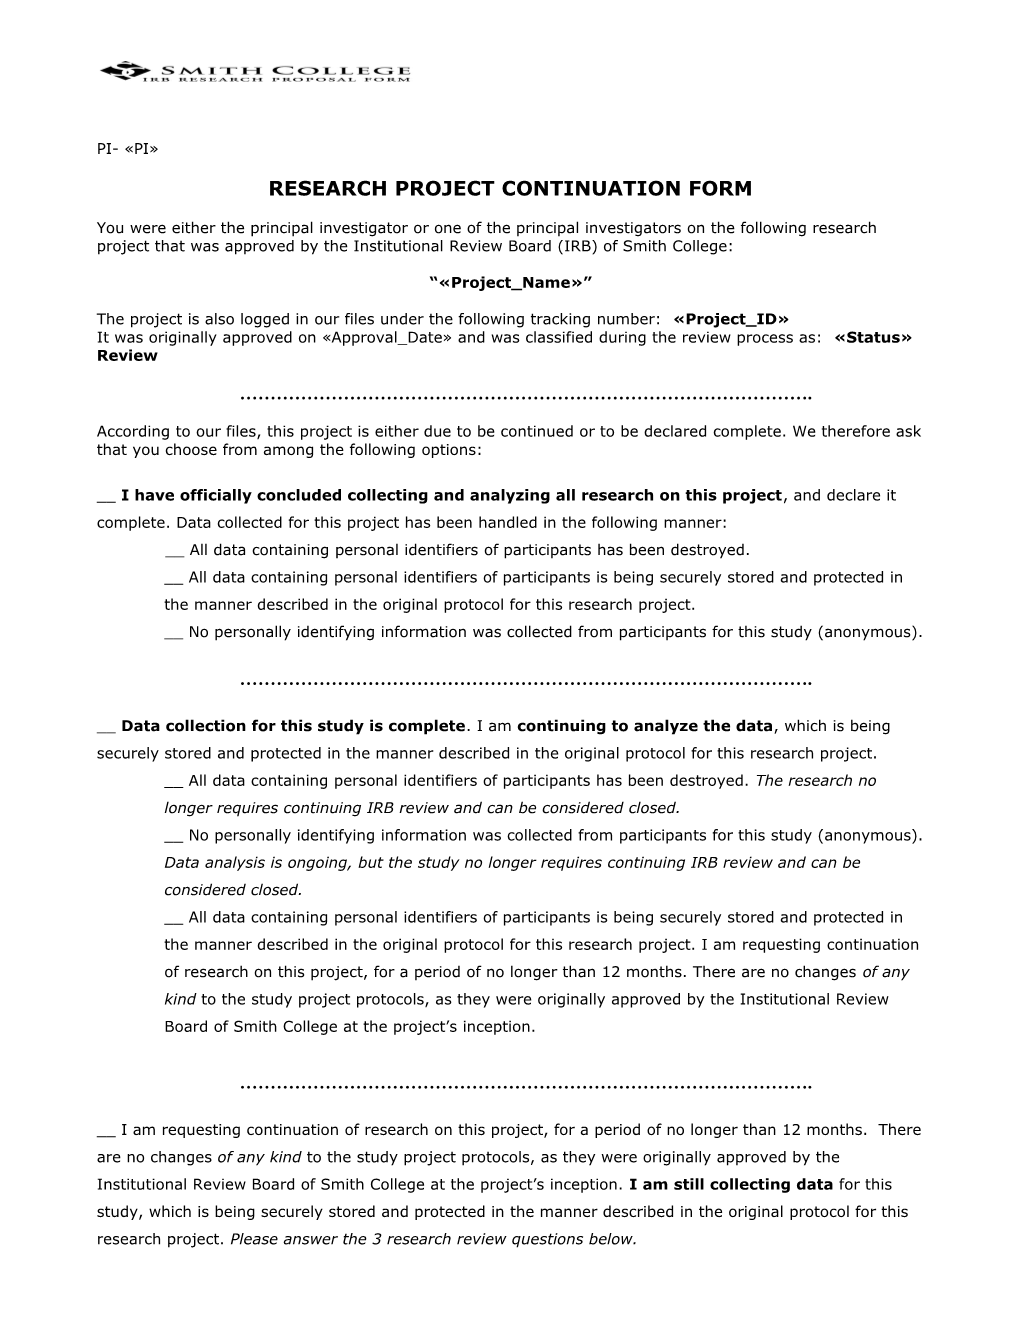 Research Project Continuation Form